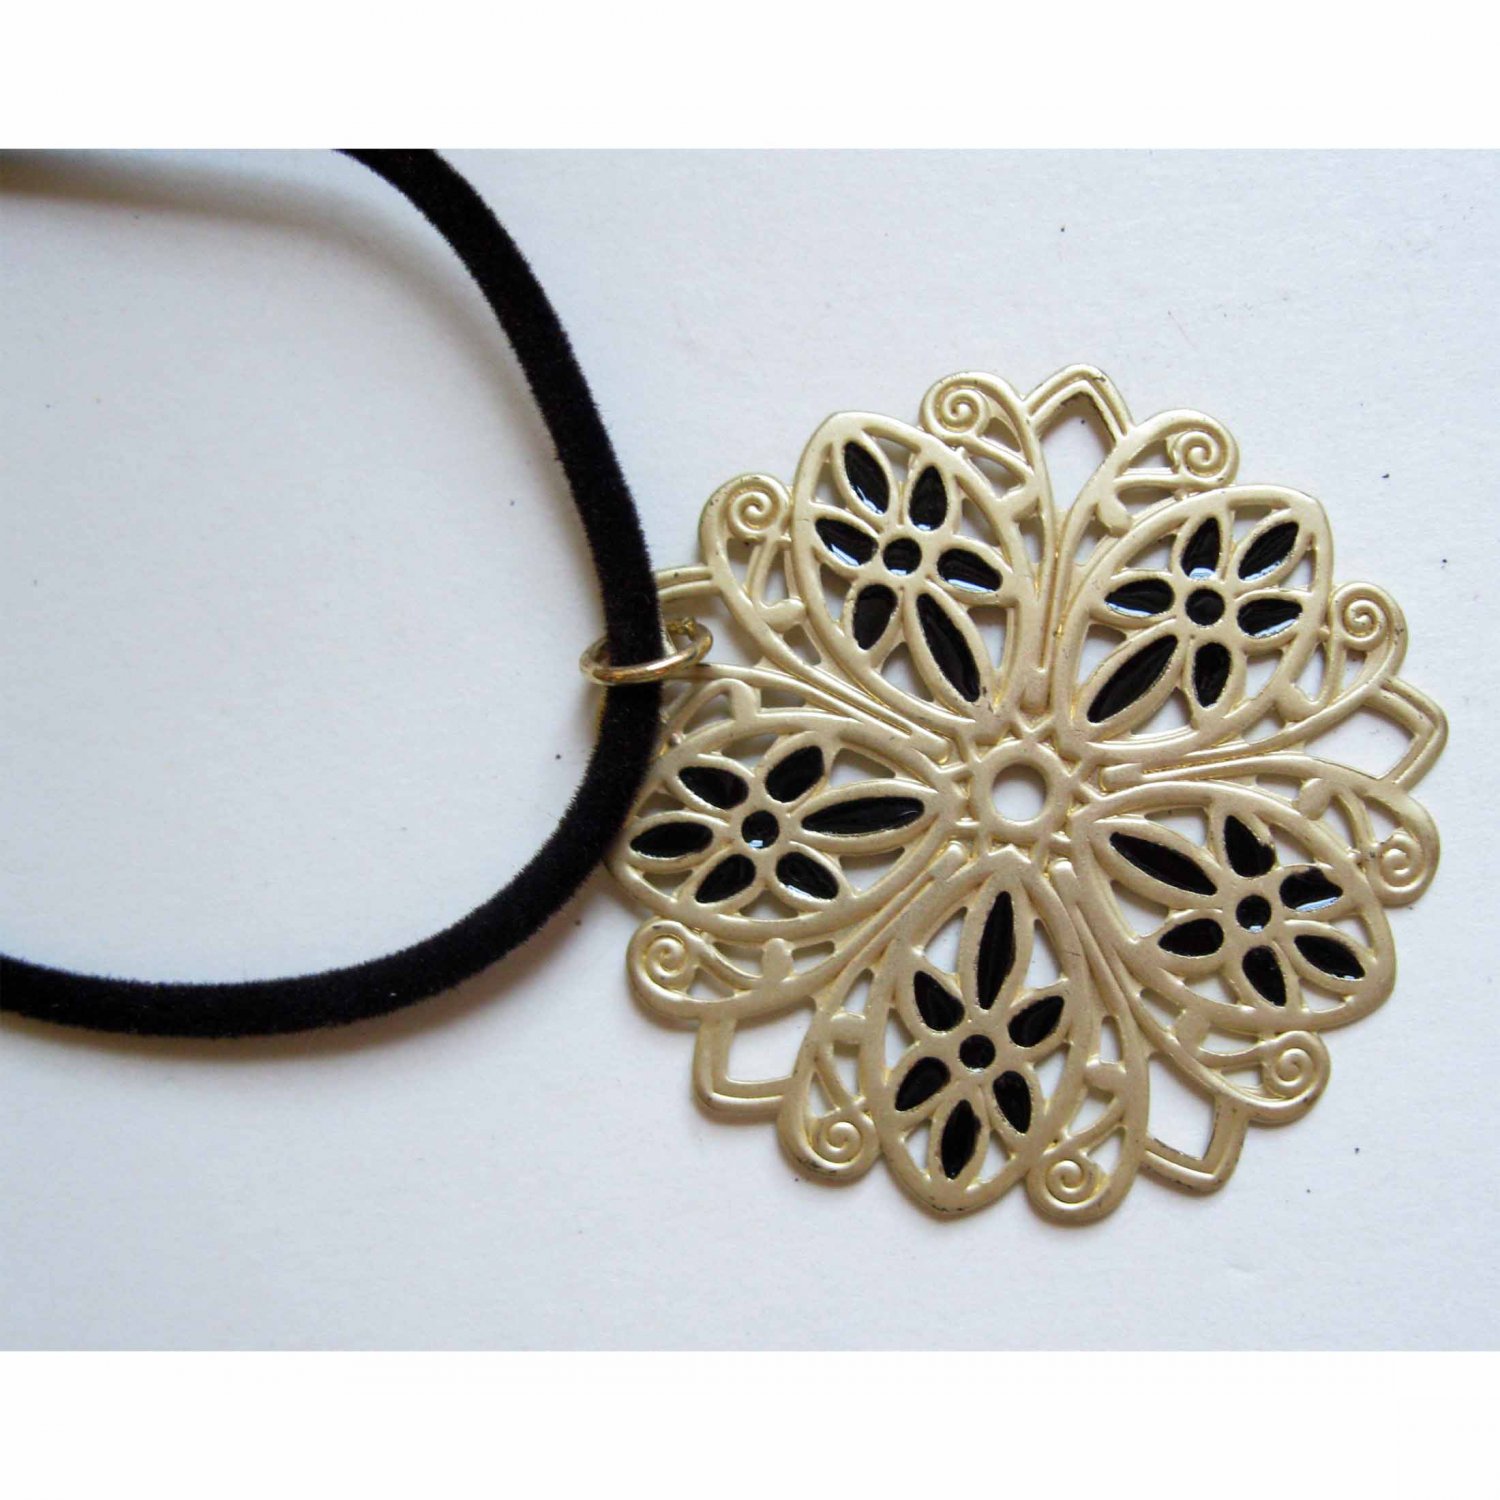 Gold and black trendy fashion pendant on velvety cord, boutique jewelry, ON SALE